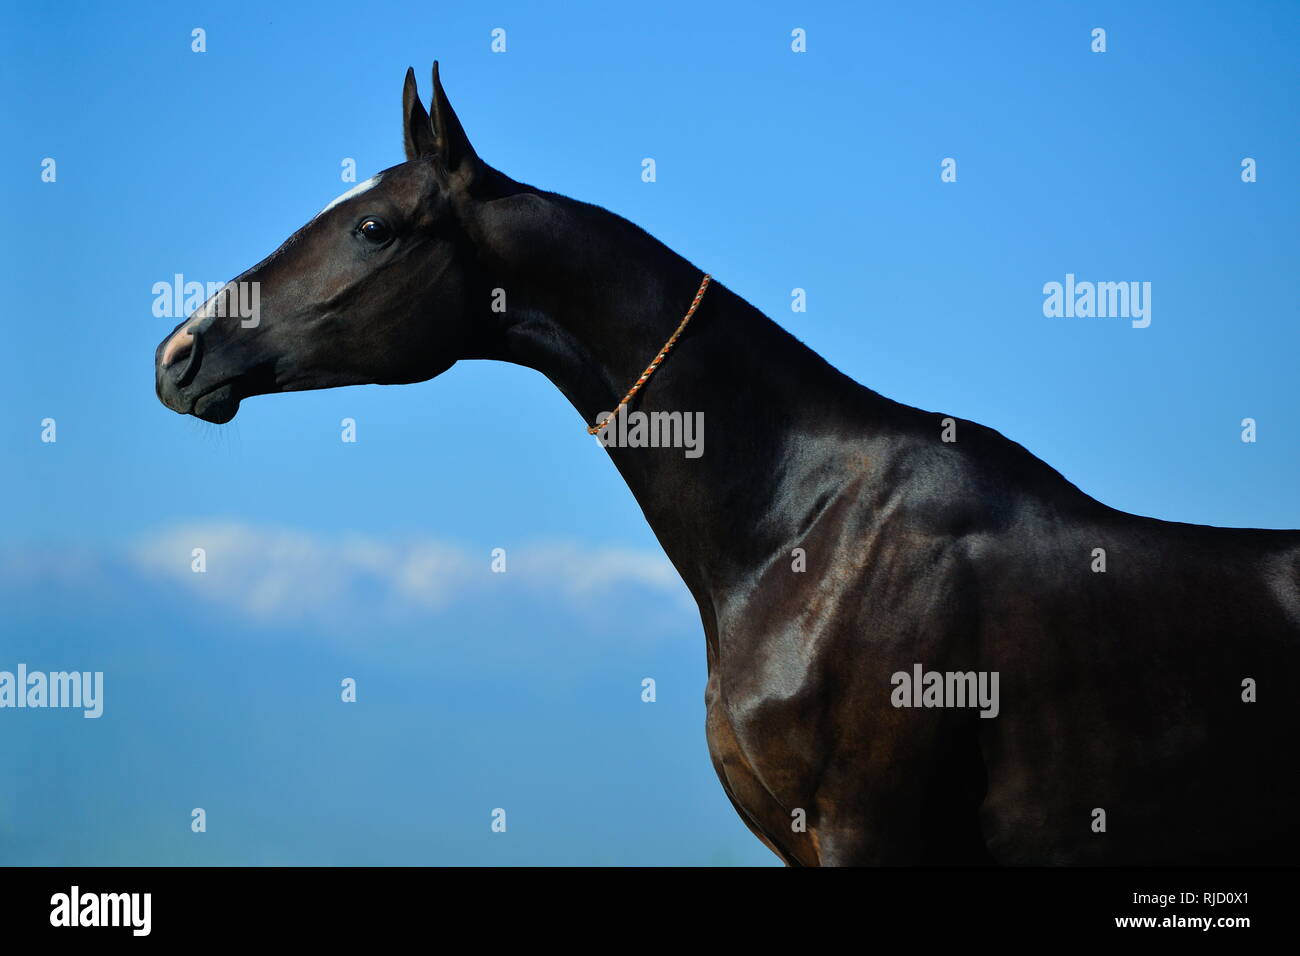 Black Akhal-Teke mare stretching her long neck and posing for the camera. Horizontal, side view, portrait. Stock Photo